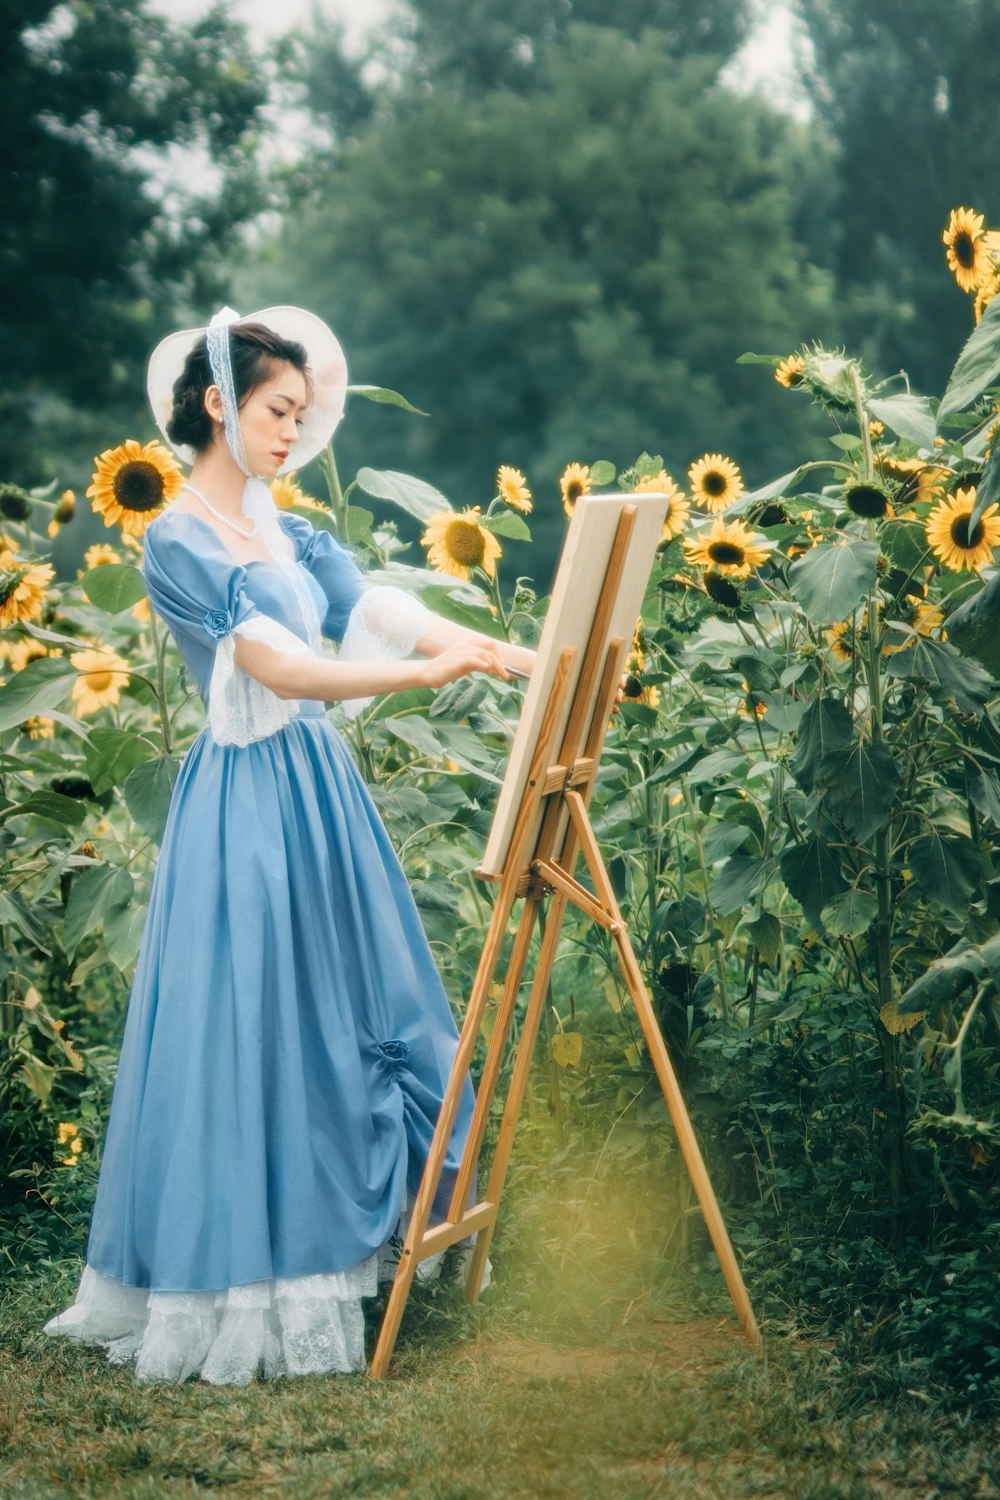 a woman in a blue dress painting a sunflower